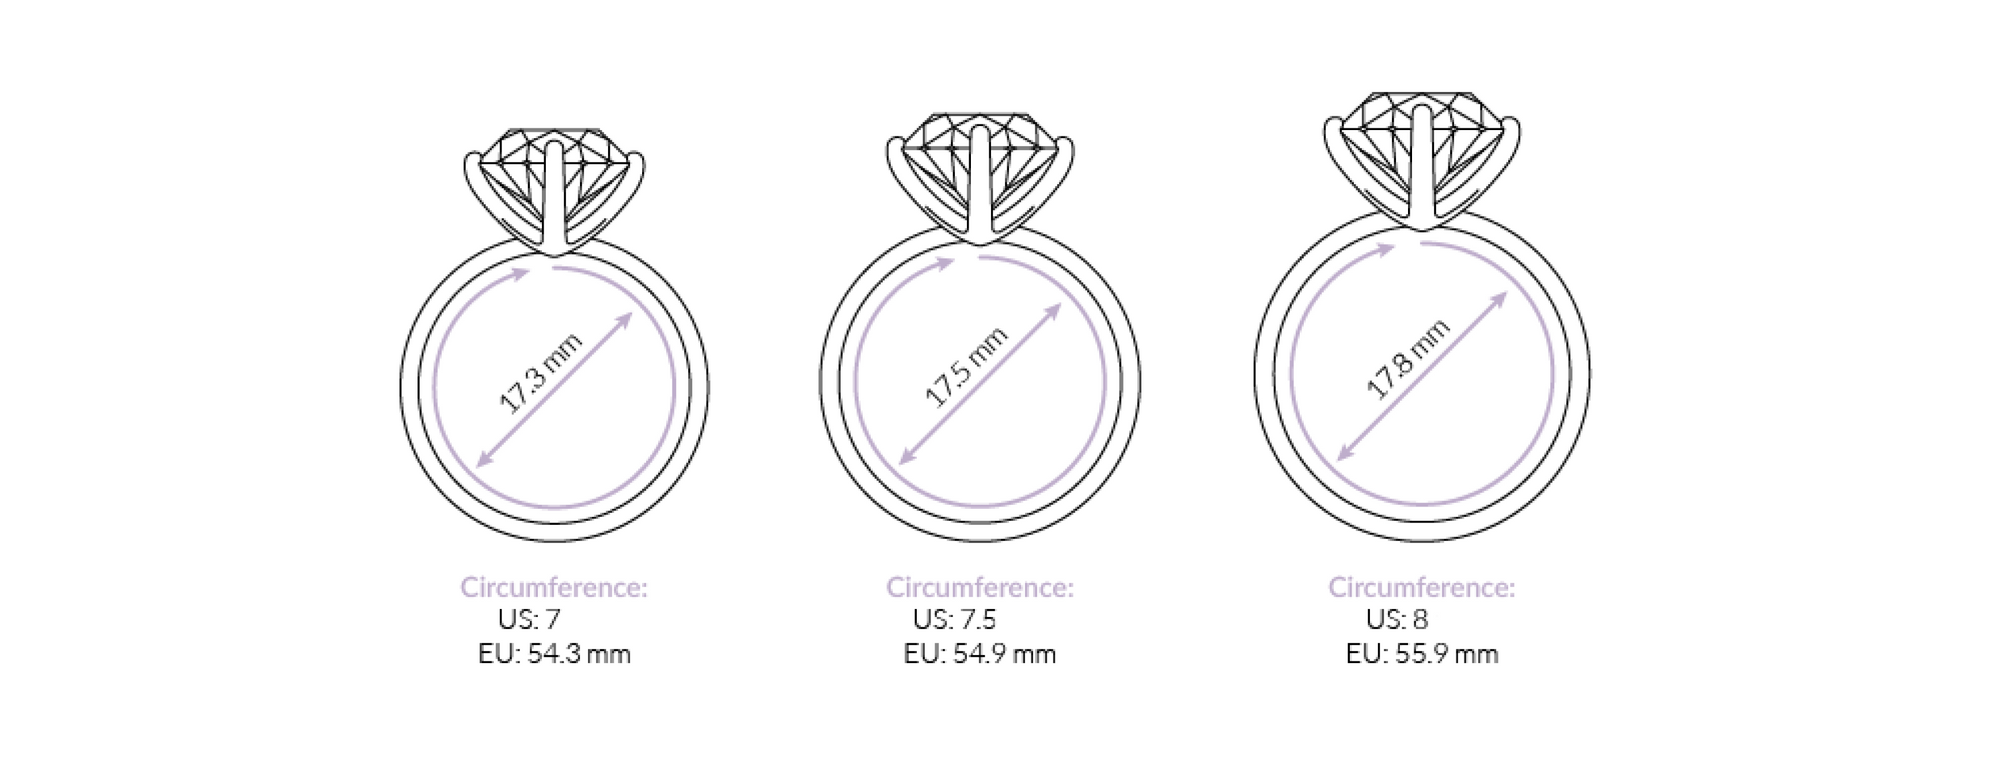 How to Measure Your Ring Size at Home: A Step-by-Step Guide